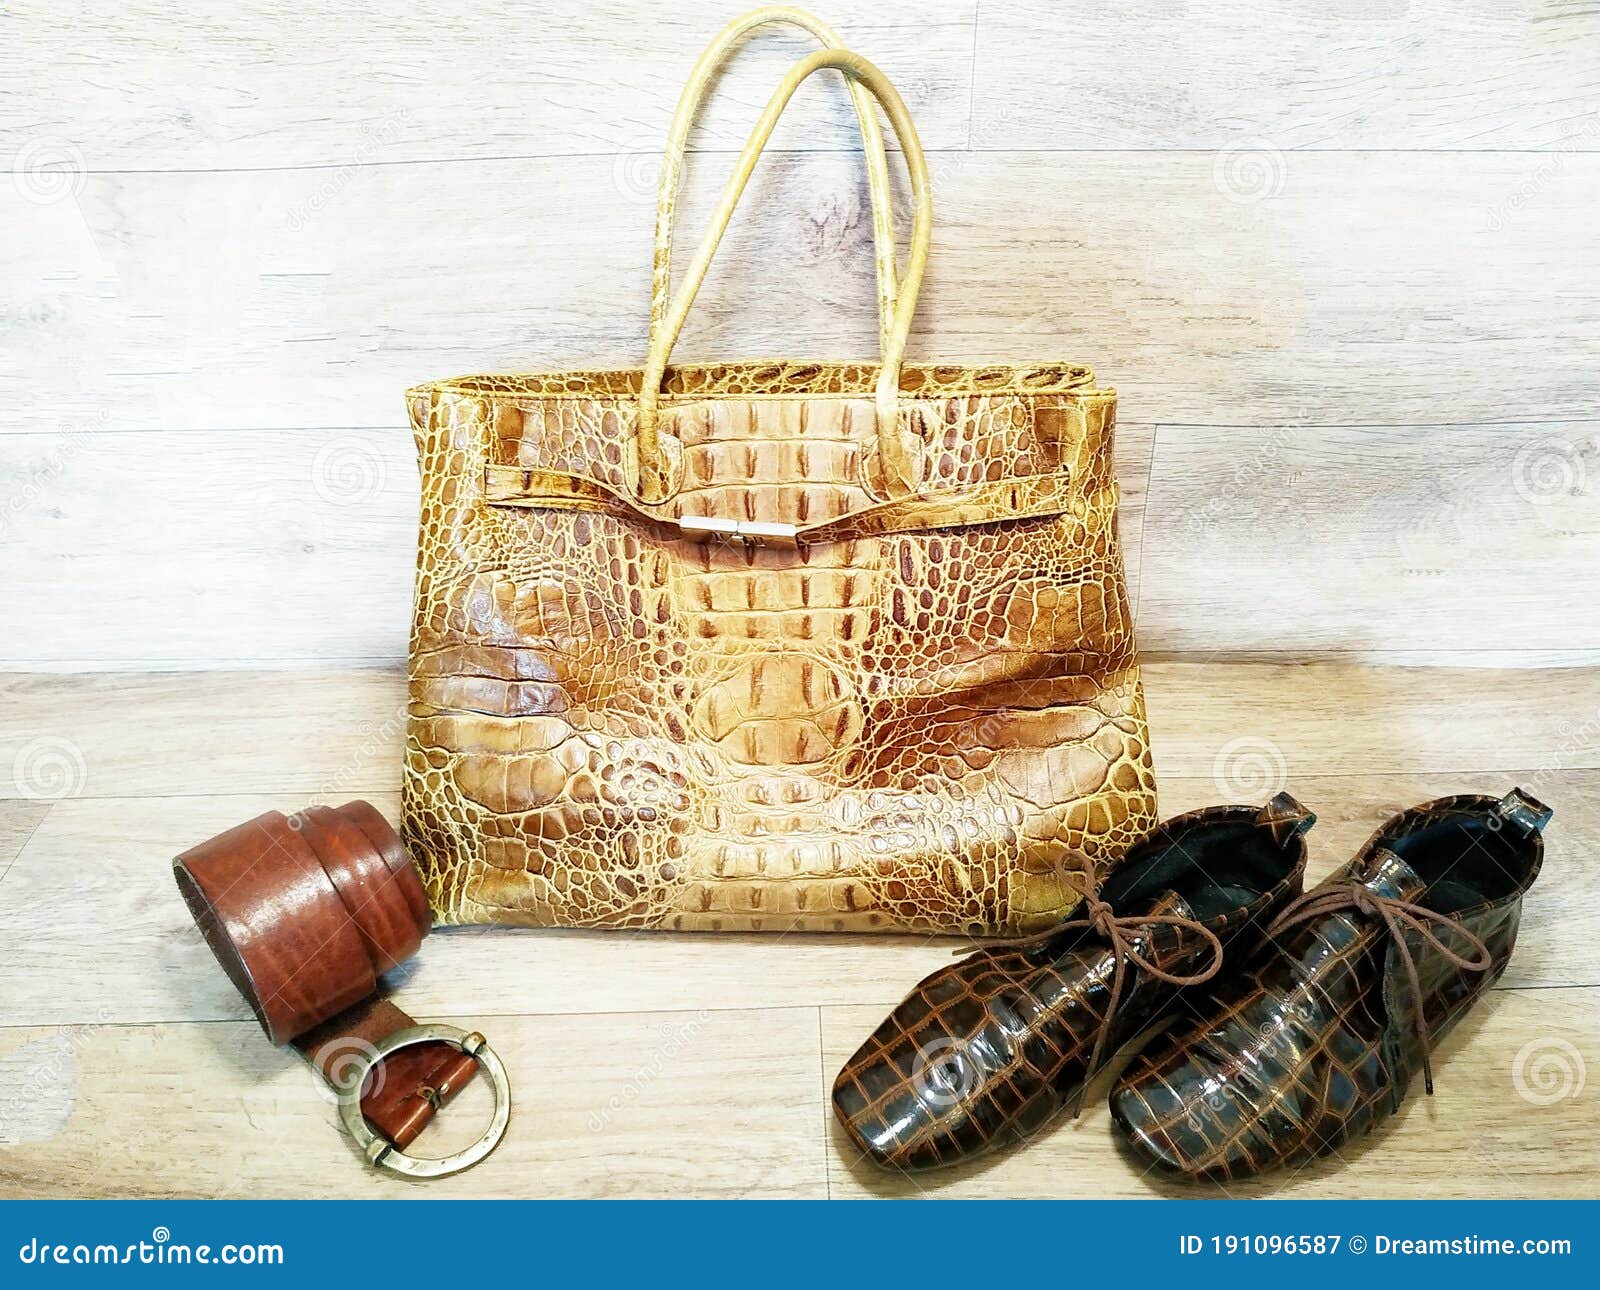 leather products: bags, shoes, belts on a wooden textured background